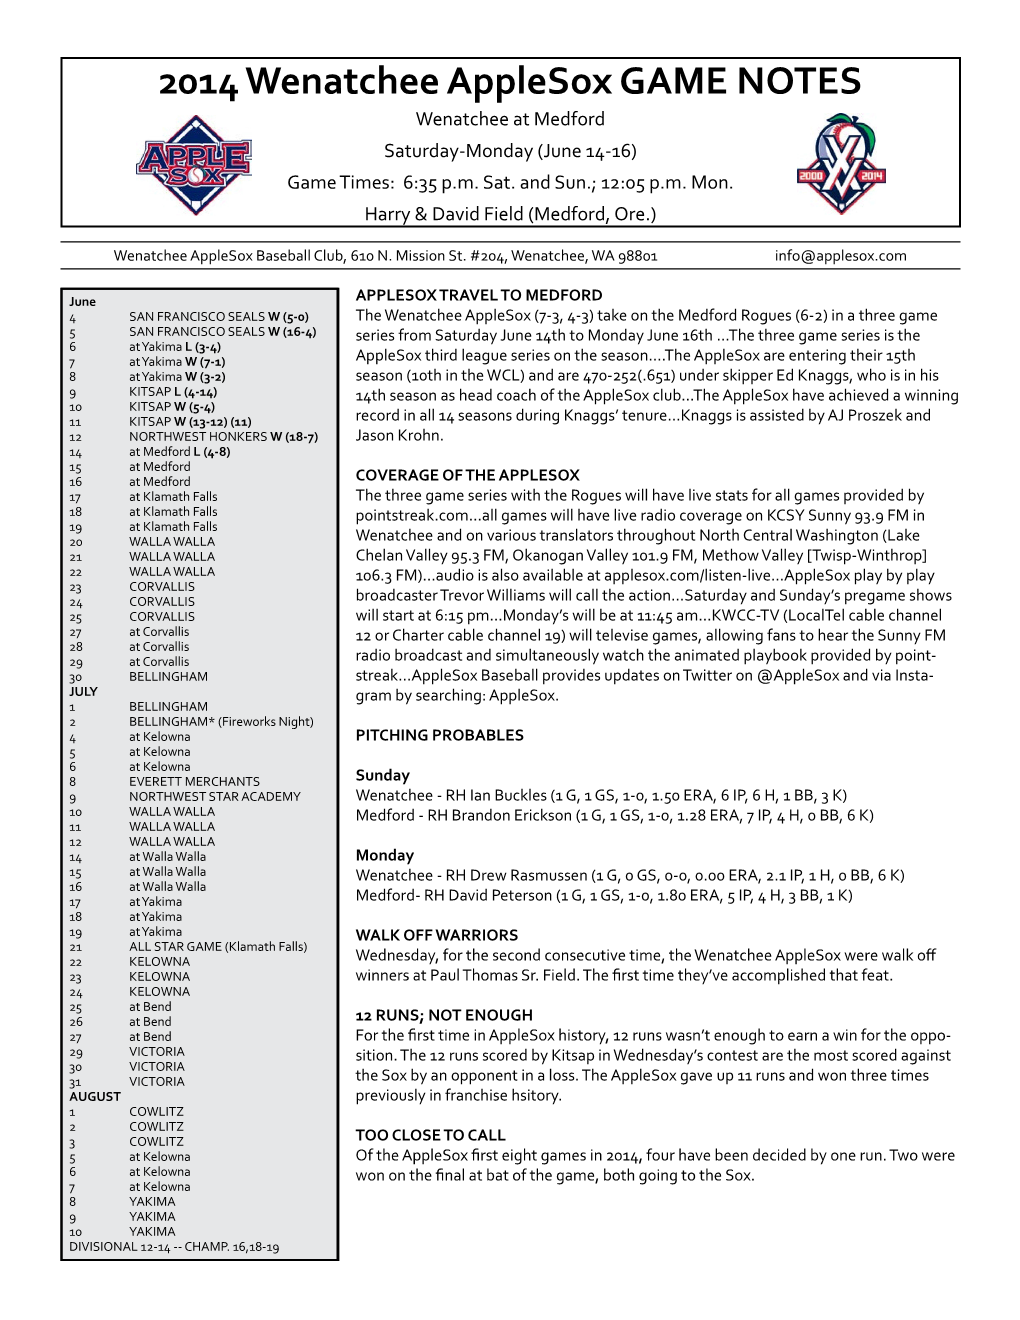 Medford Series Game Notes